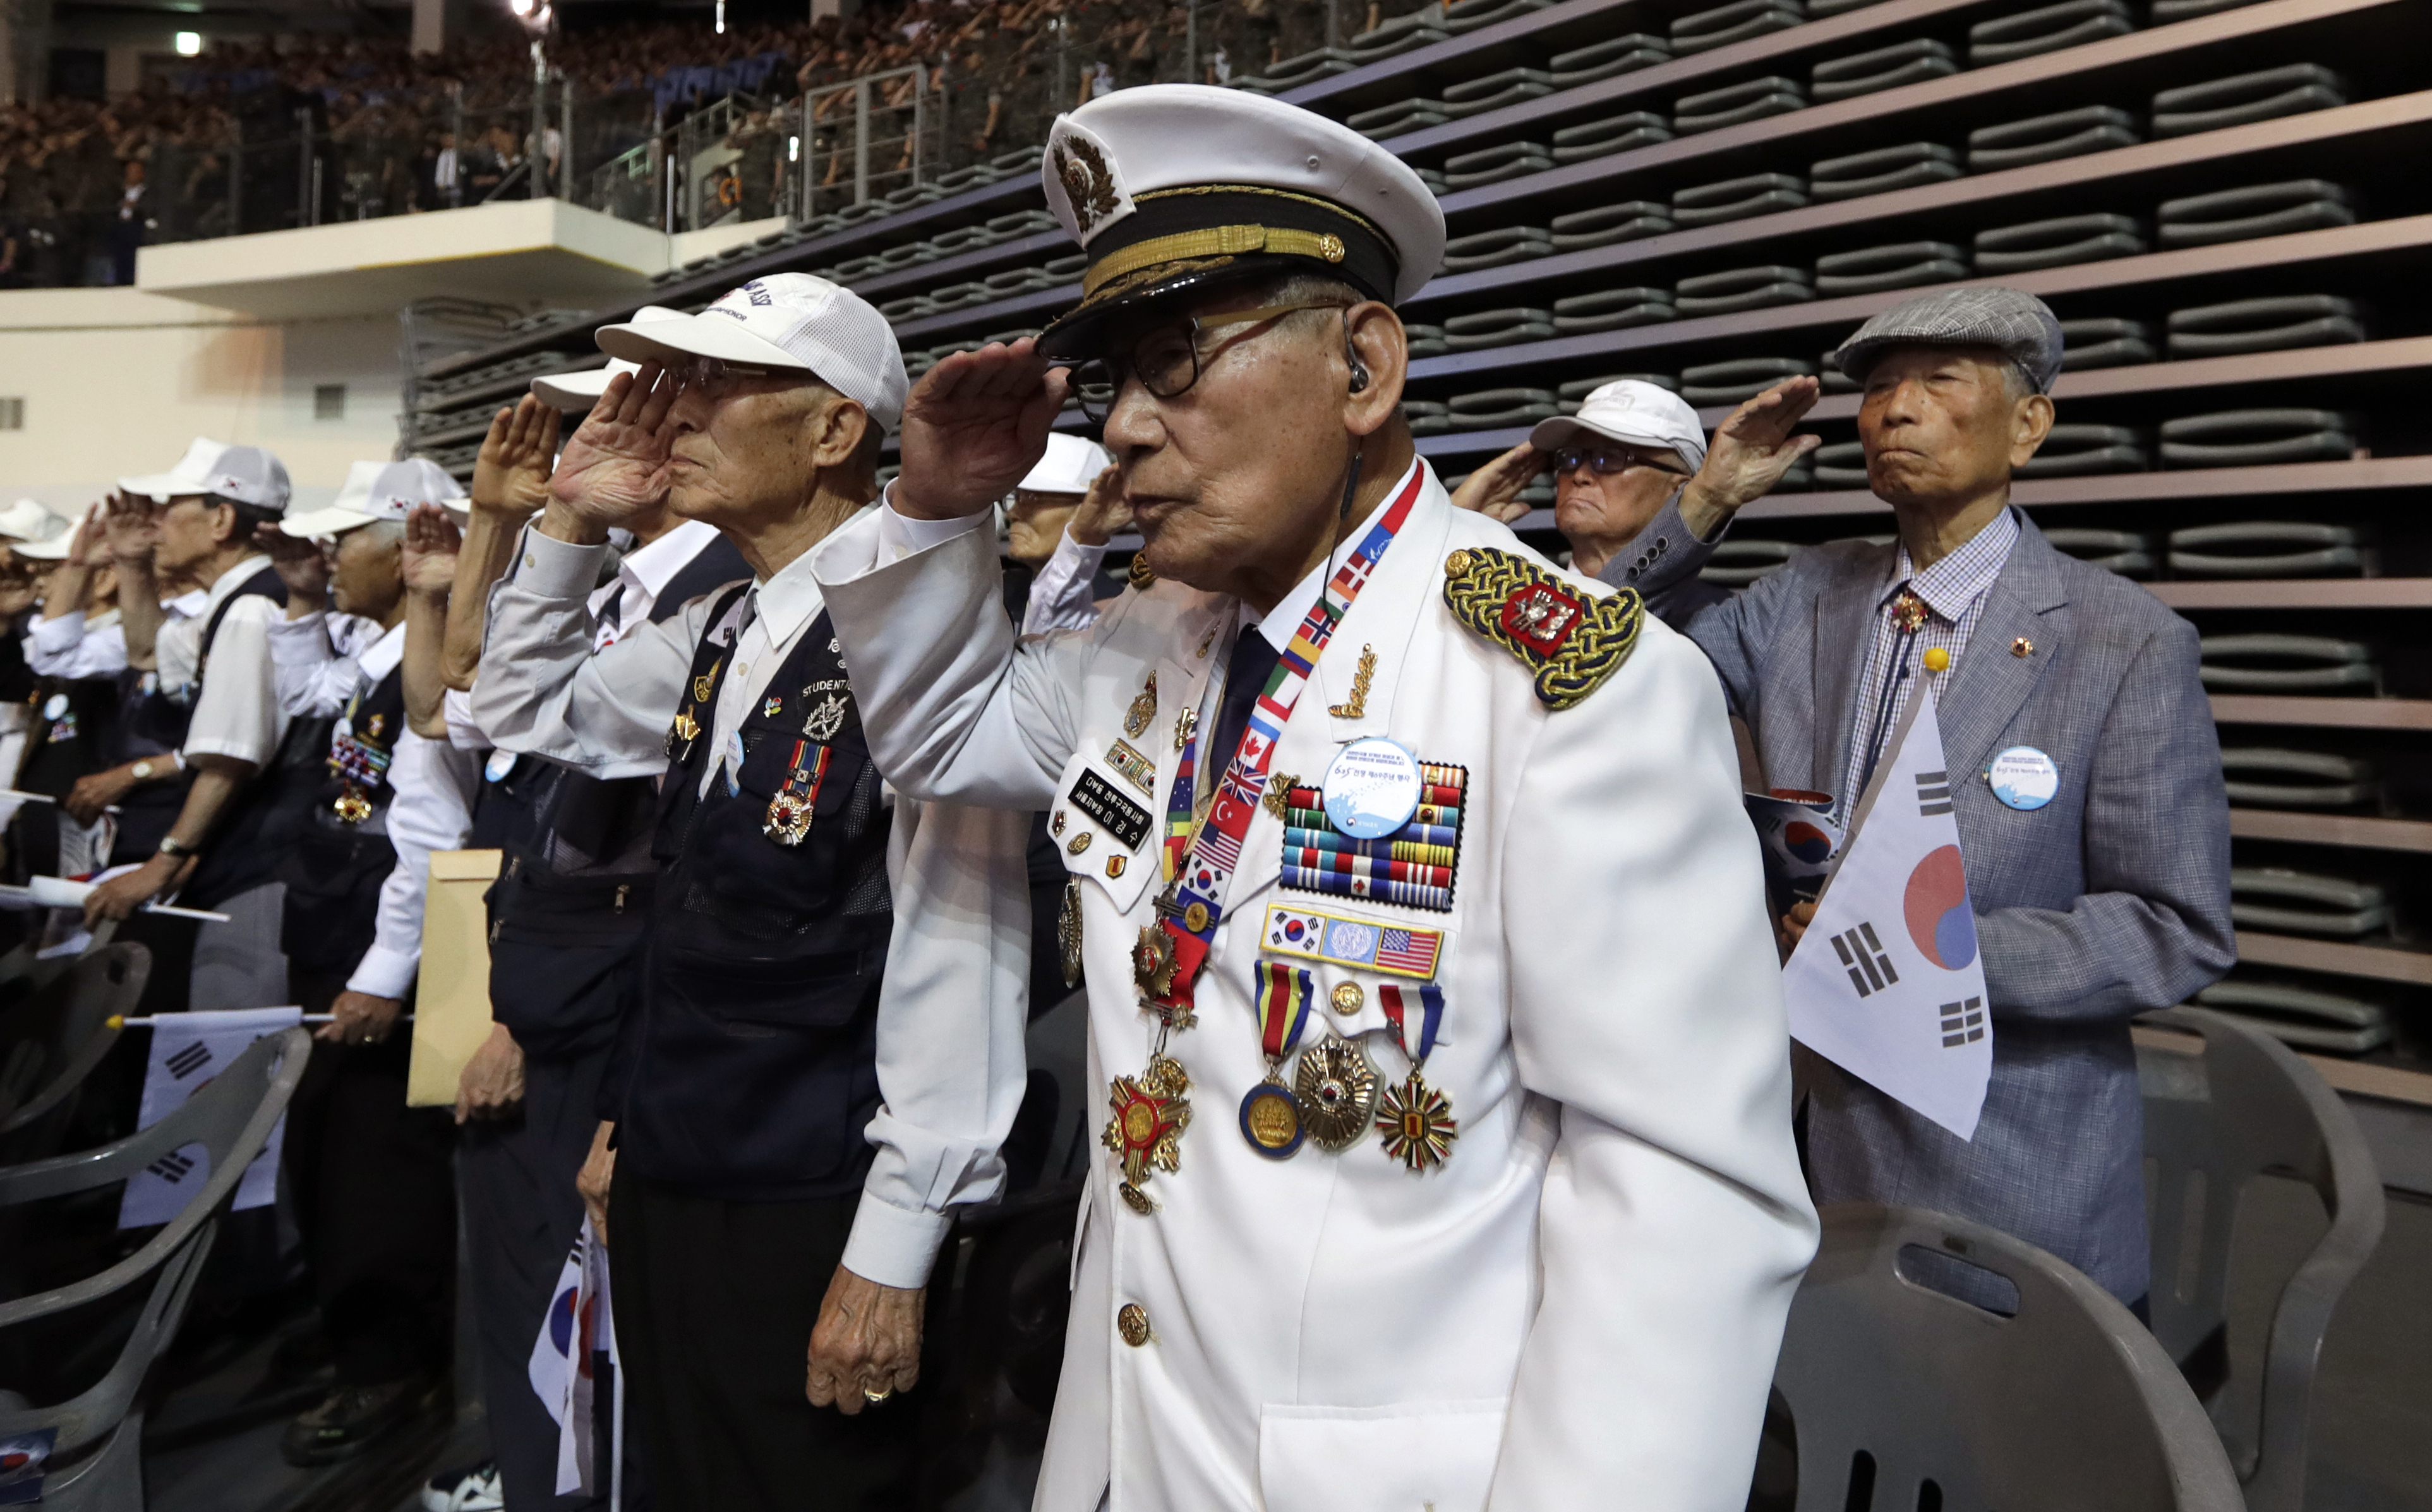 A South Korean war veteran Lee Kyung-su, 90, salutes during a ceremony to mark the 69th anniversary of the outbreak of the Korean War in Seoul, South Korea, Tuesday, June 25, 2019. South Korea and North Korea fought a devastating three-year war in the early 1950s that ended with an armistice, not a peace treaty. (AP Photo/Lee Jin-man)